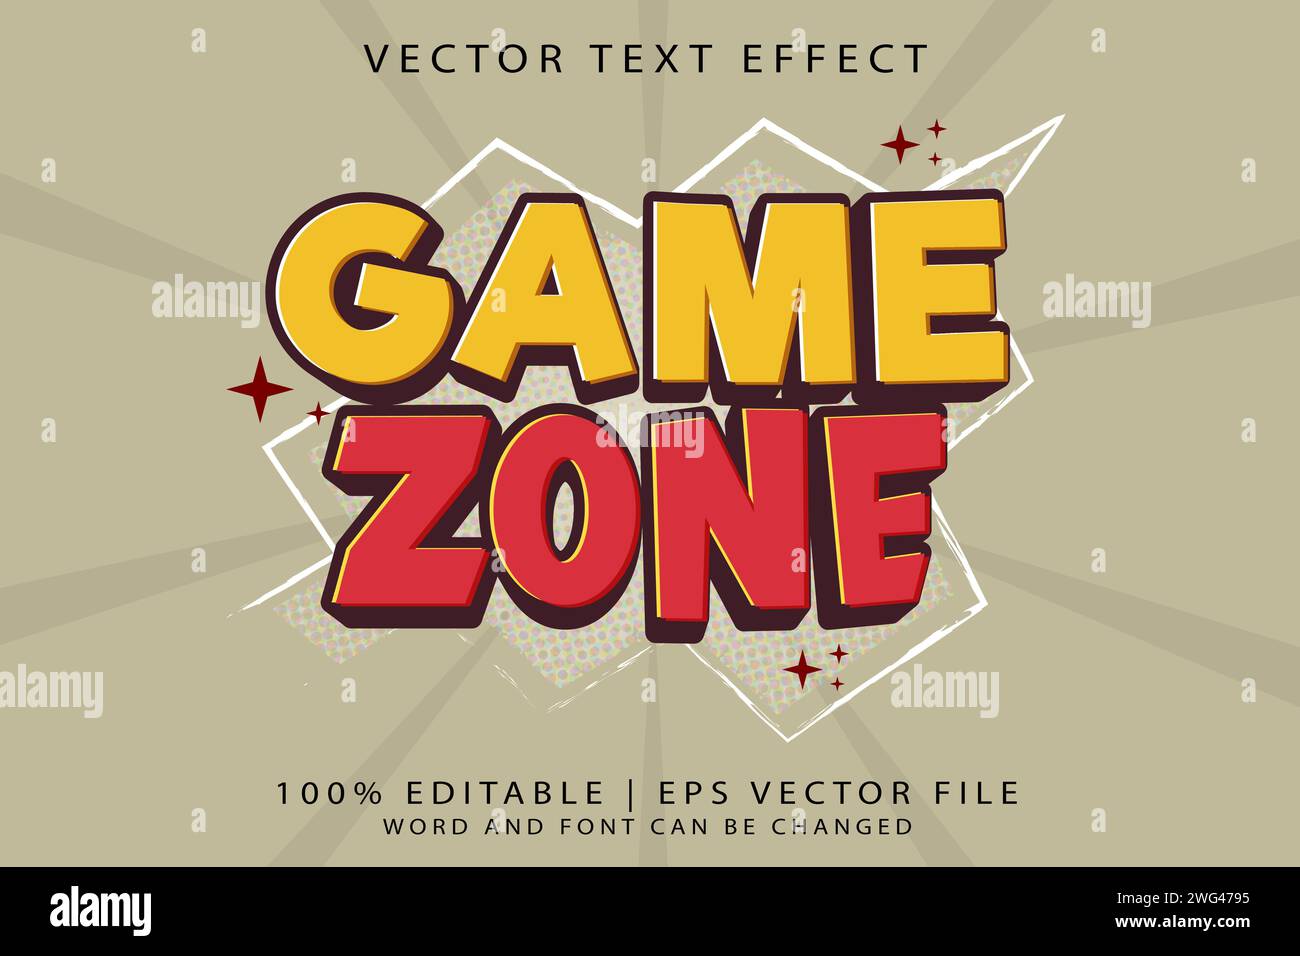 Game Zone 3d cartoon template style premium vector with editable text effect Stock Vector